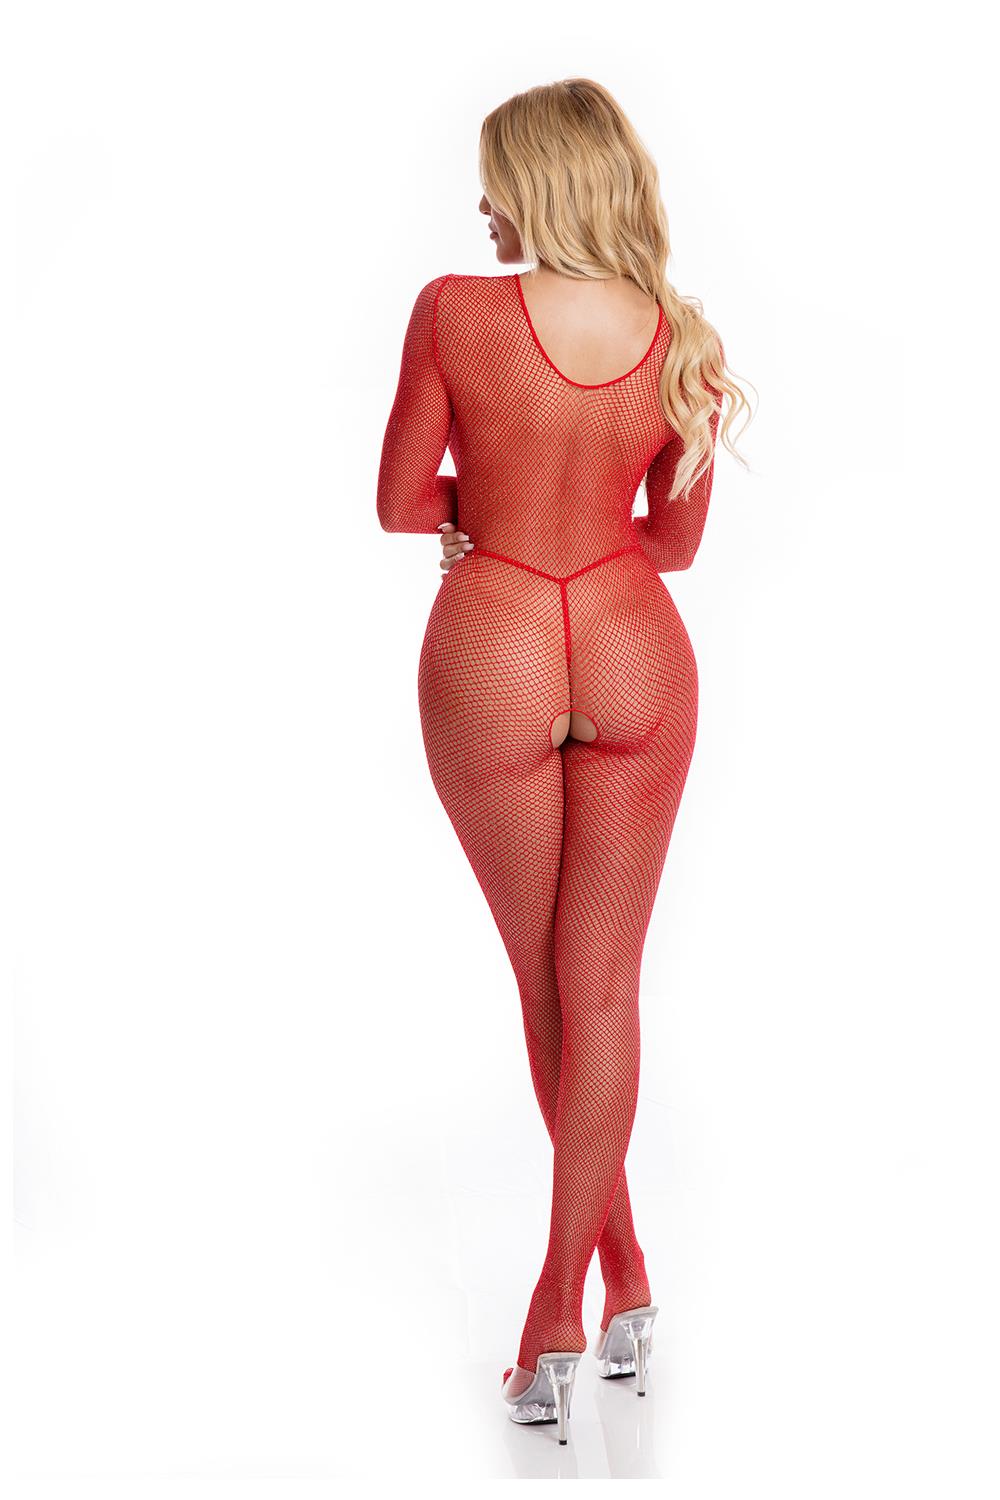 Risque Crotchless Bodystocking Red M/l